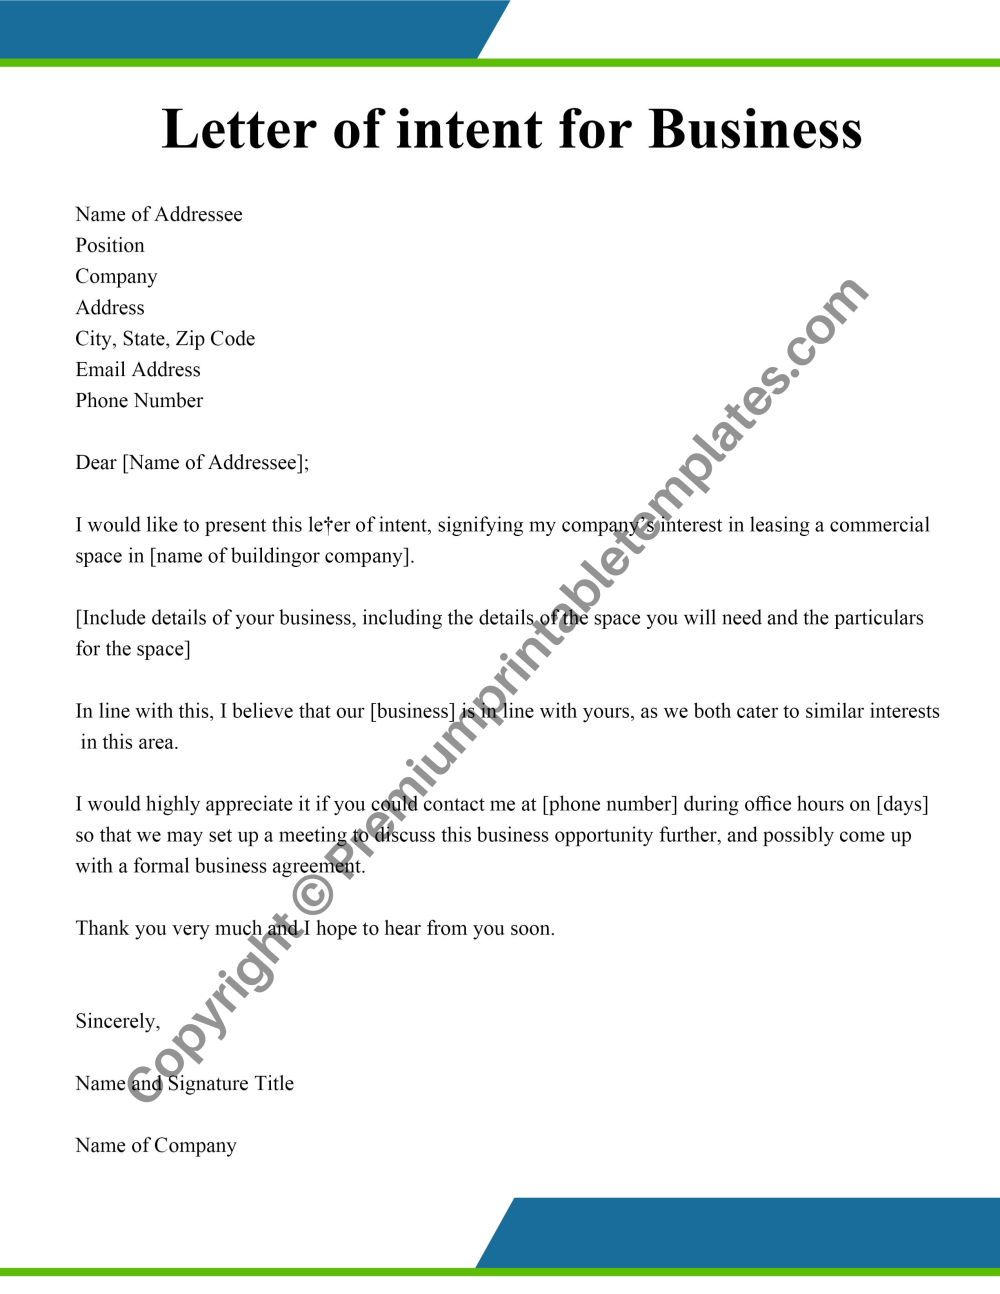 Business Letter of intent